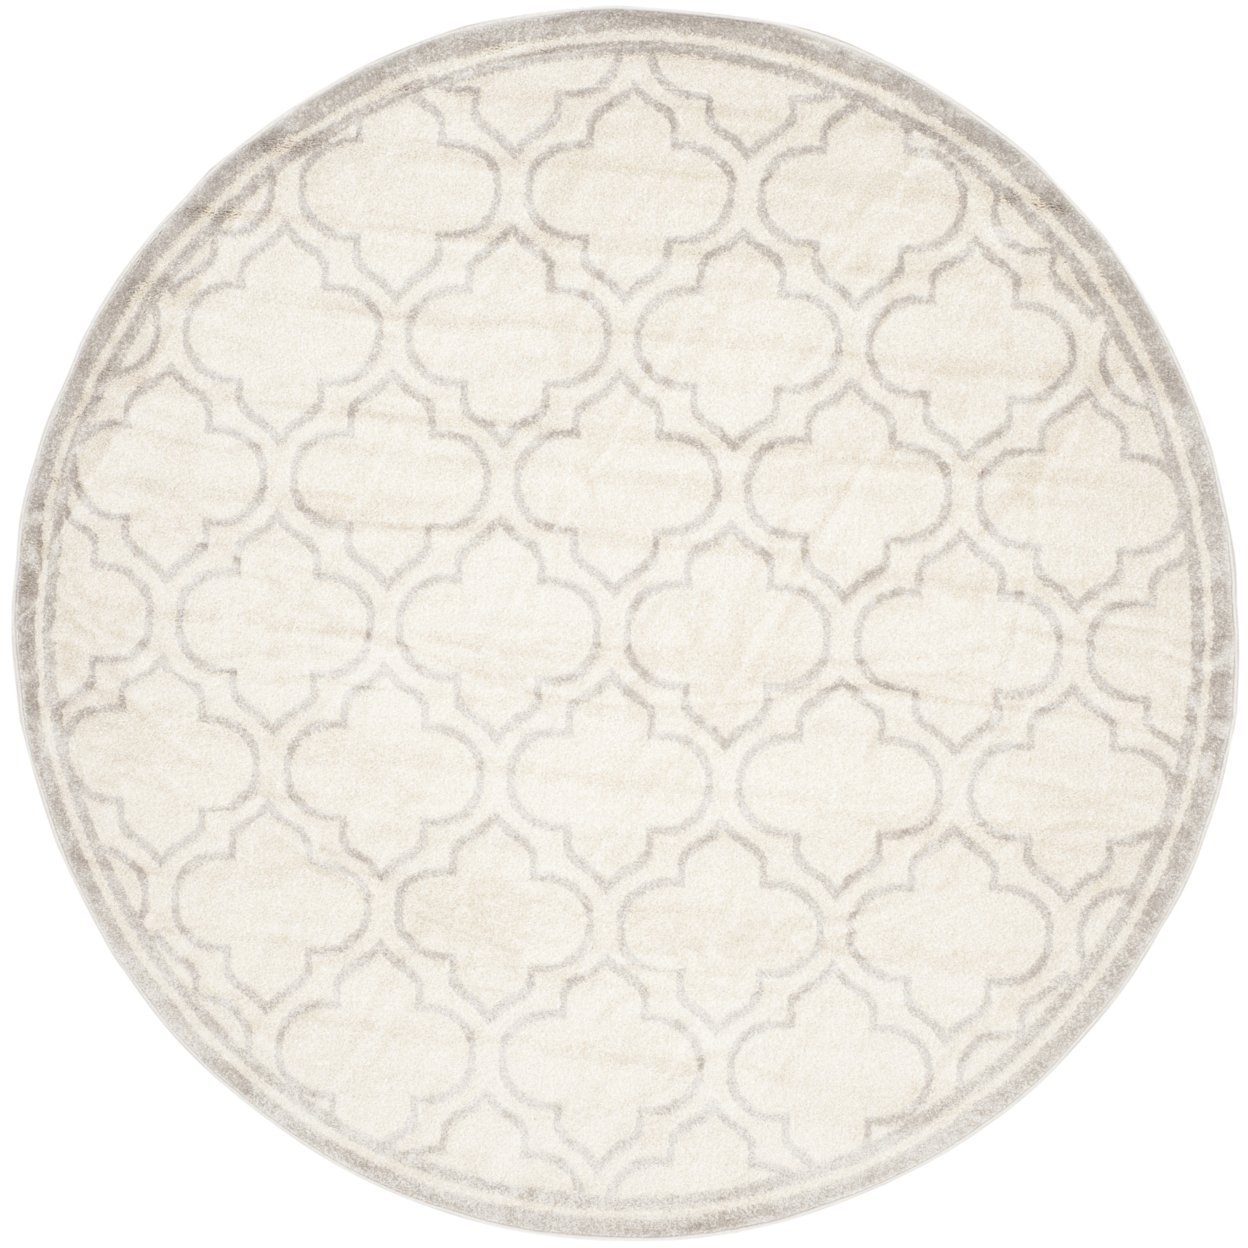 SAFAVIEH Amherst Collection AMT412E Ivory/Light Grey Rug - 7' Round